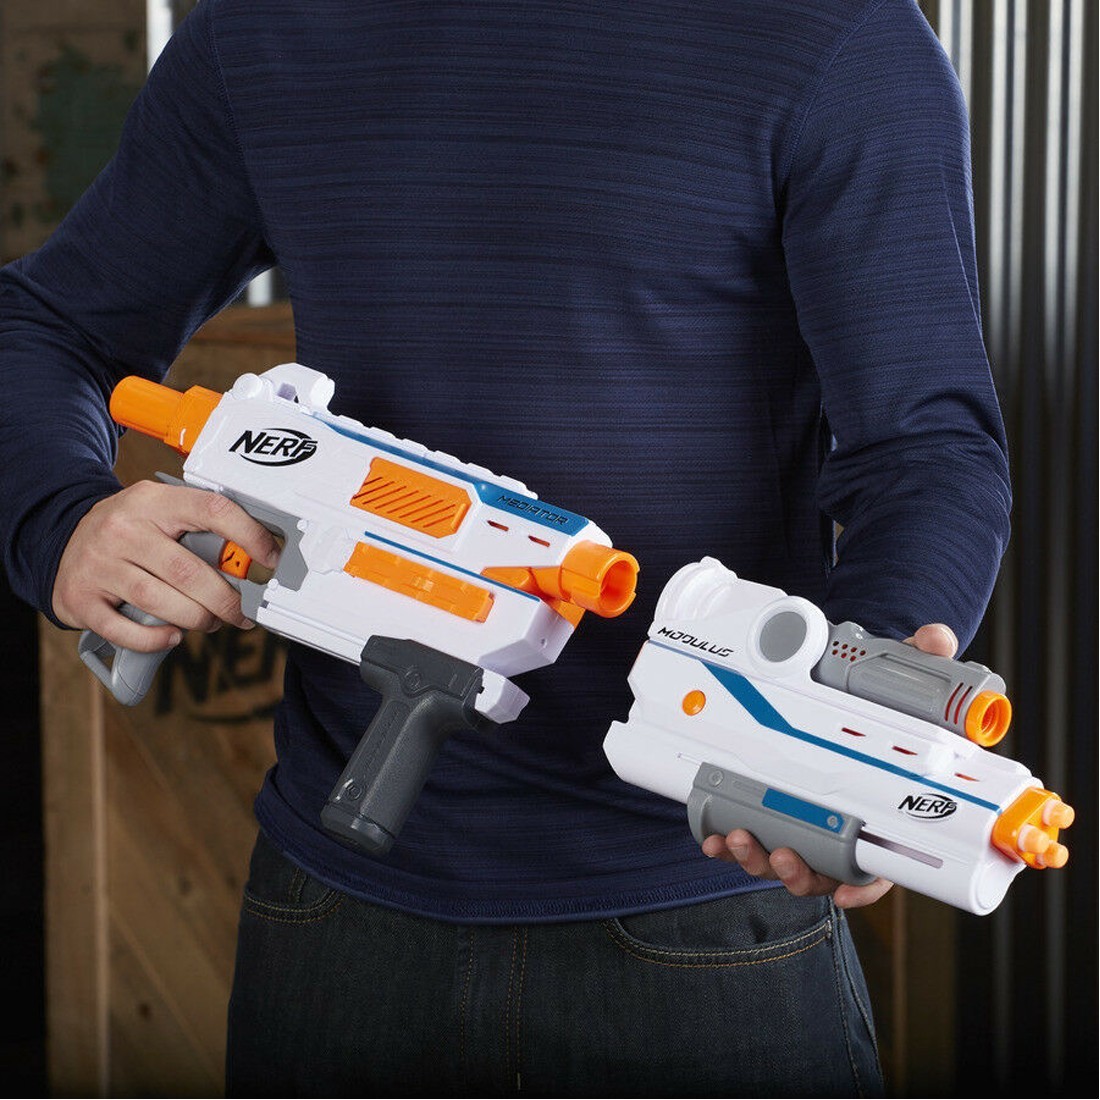 Shop Nerf N-Strike Modulus Mediator Blaster - Nerf, delivered to your home  | TheOutfit